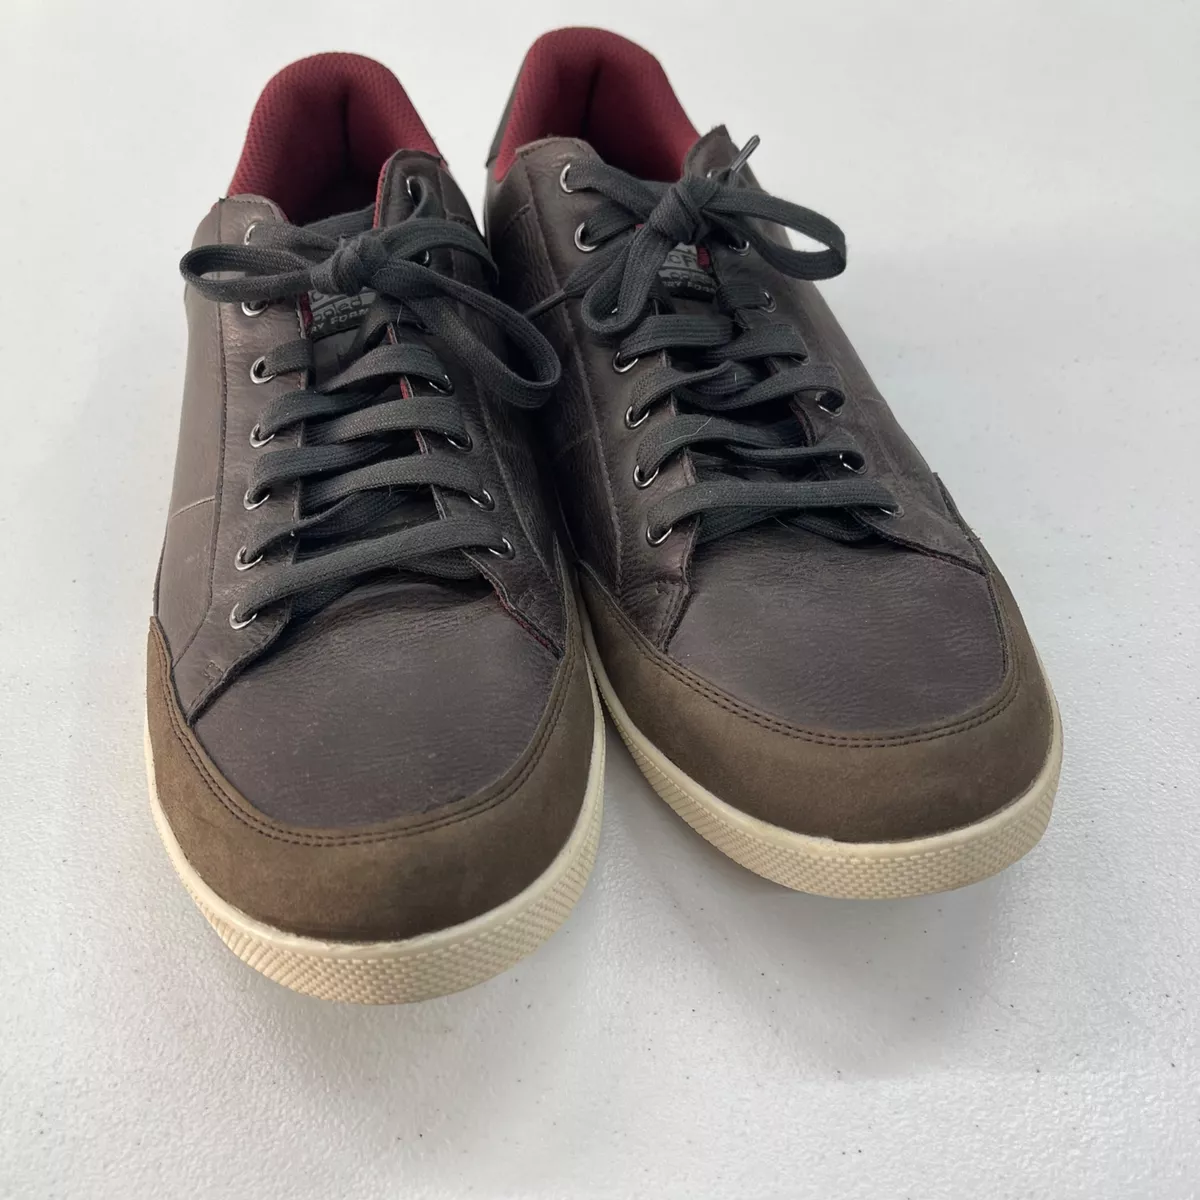 Skechers Placer Maneco Low Top Lace Up Brown Sneakers Shoes size 13 |